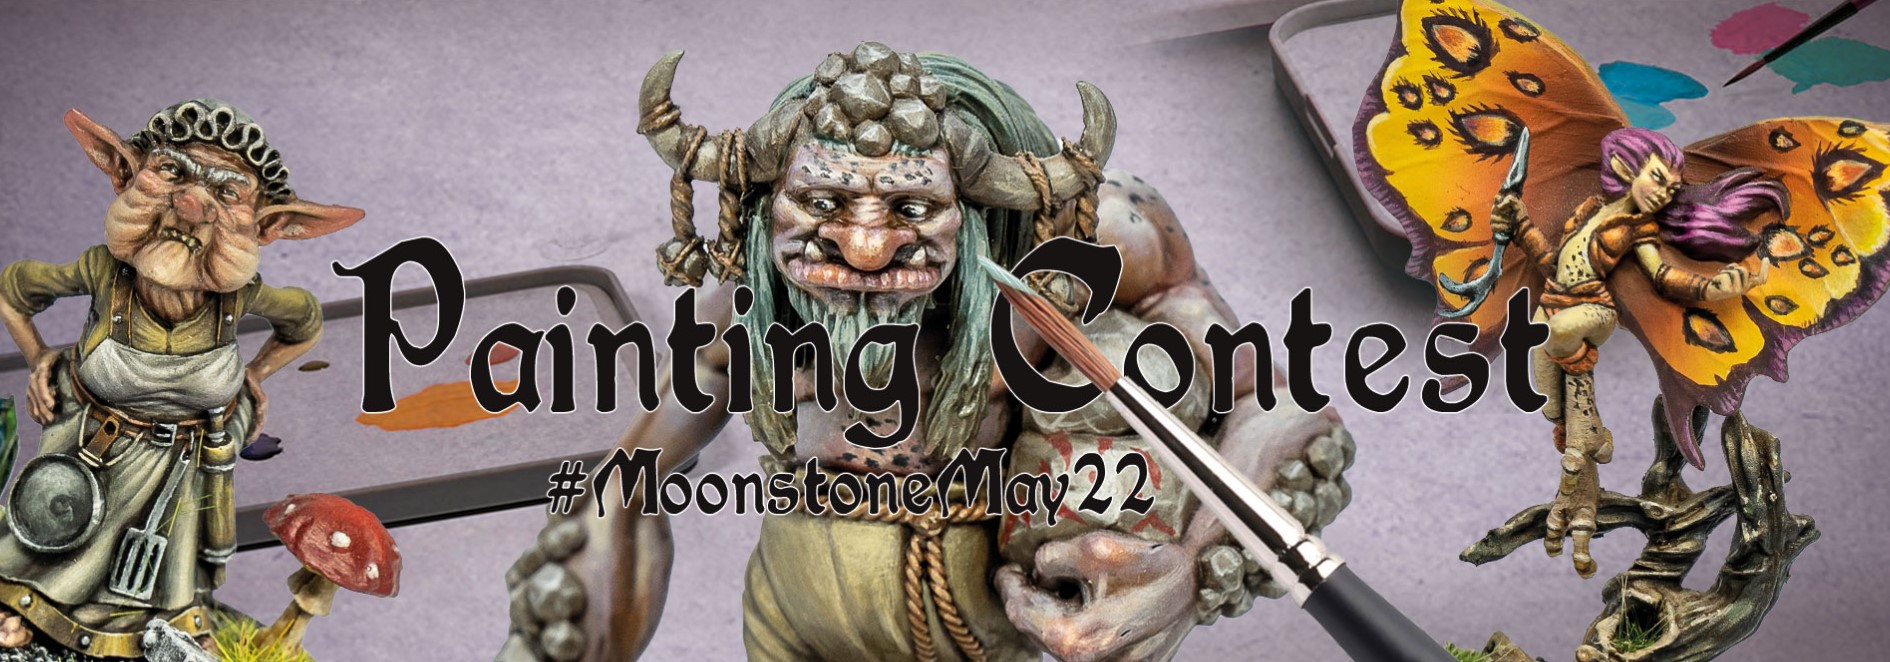 Moonstone May Painting Contest - Goblin King Games